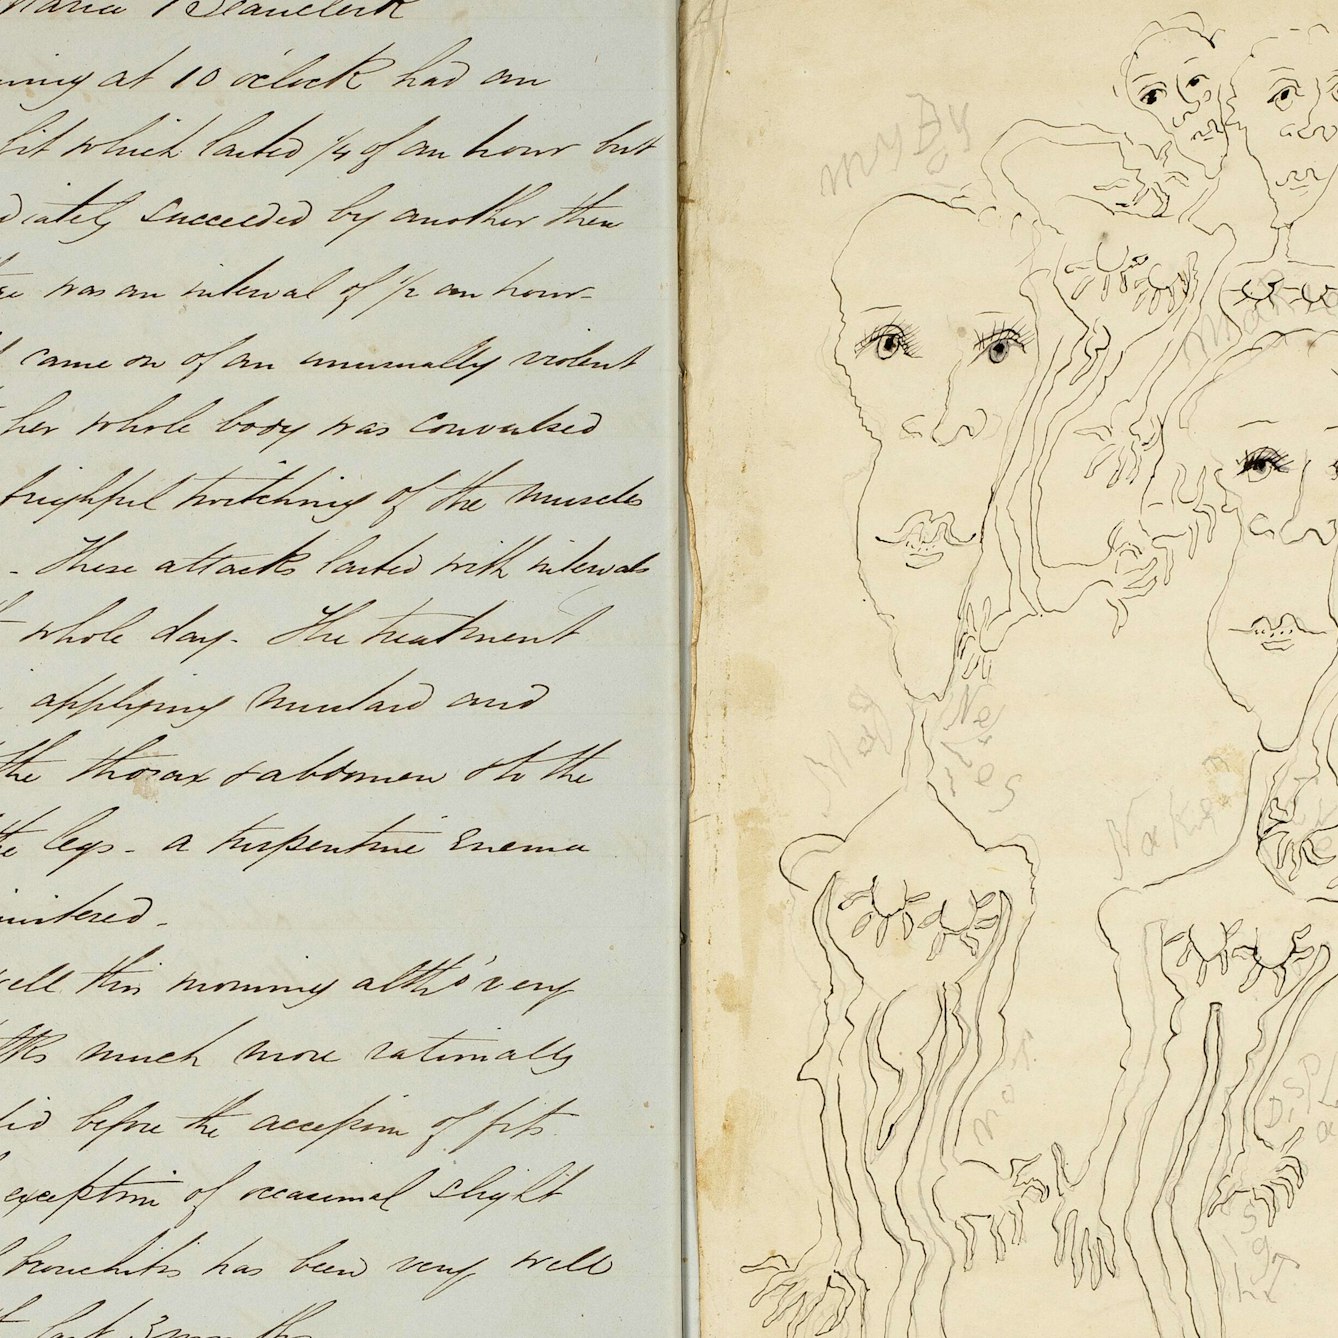 Patient records, with handwritten notes in black ink on the left, and a black and white drawing of several women on the right .